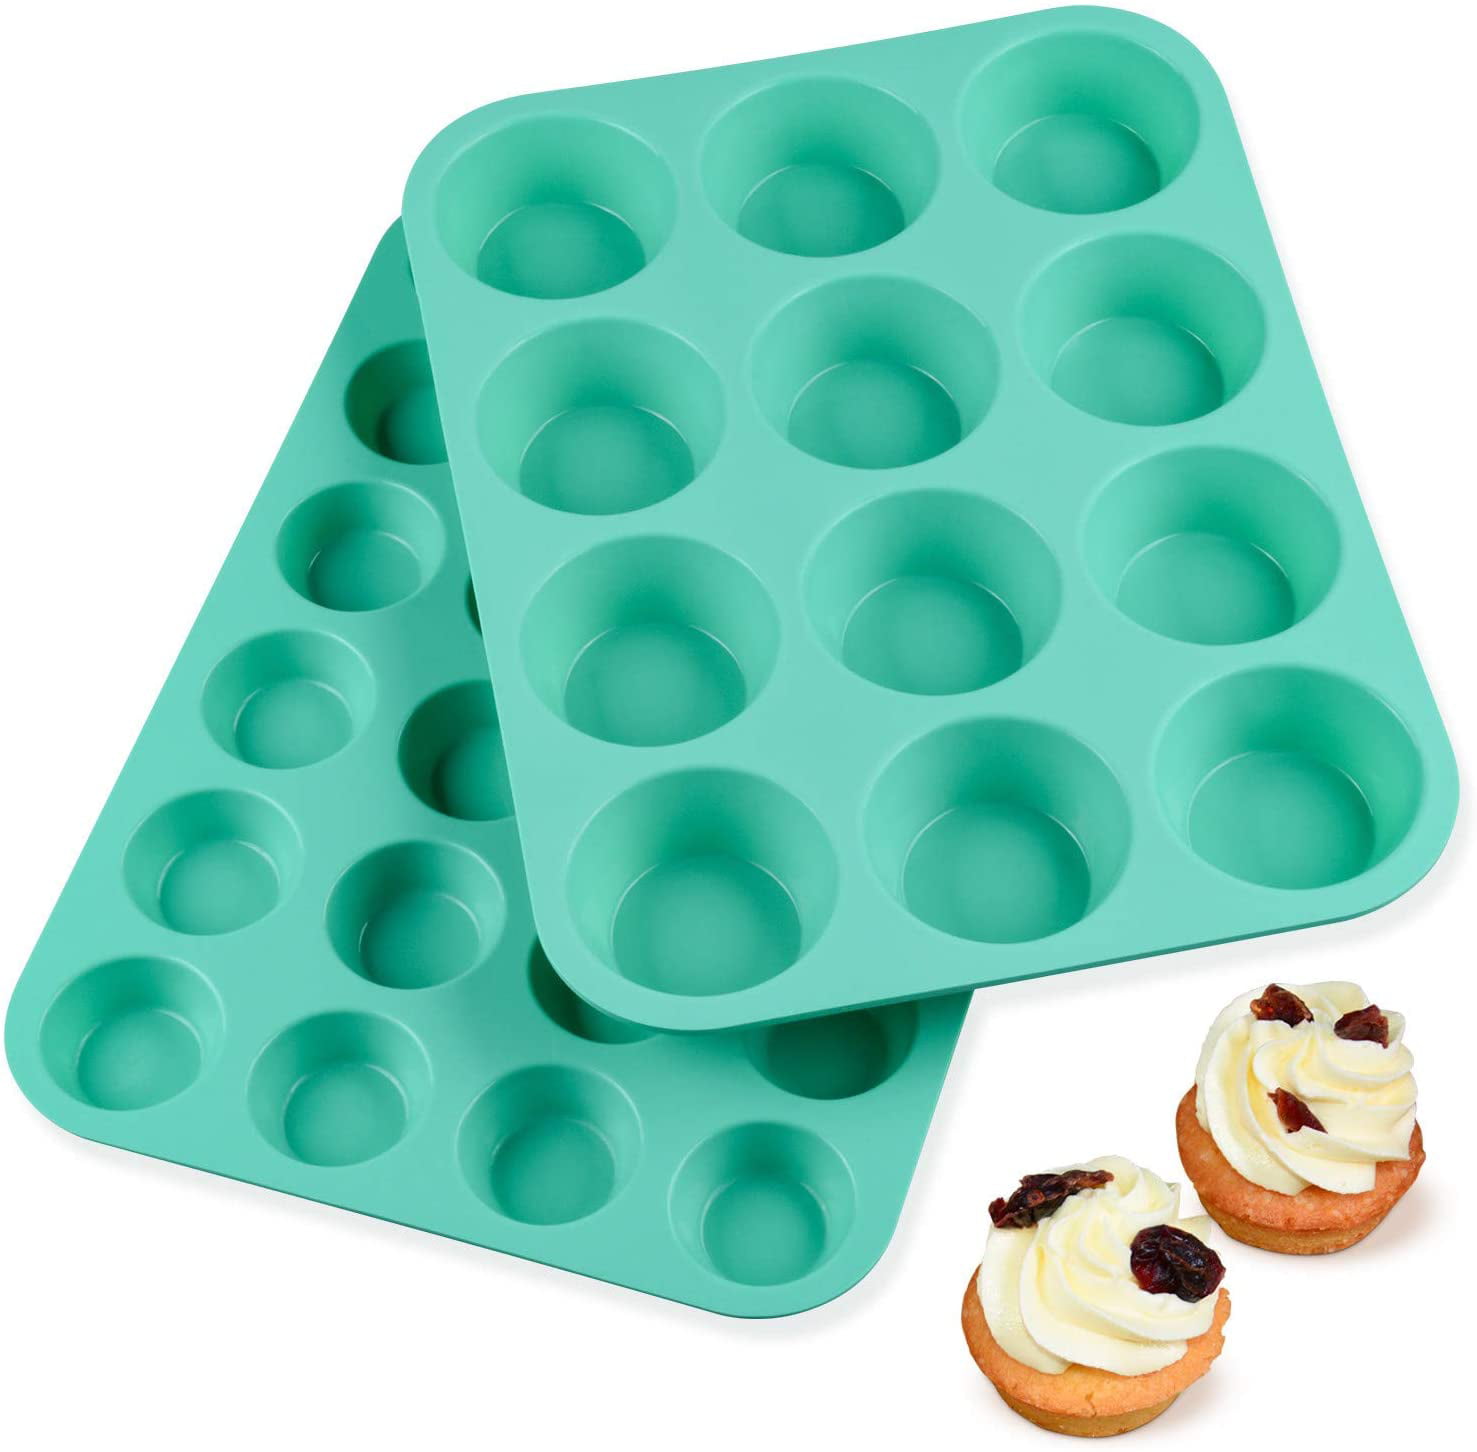 Details about   Silicone Muffin Pan European LFGB 12 Cups Cupcake Pan 2-Pack Muffin Tin for 